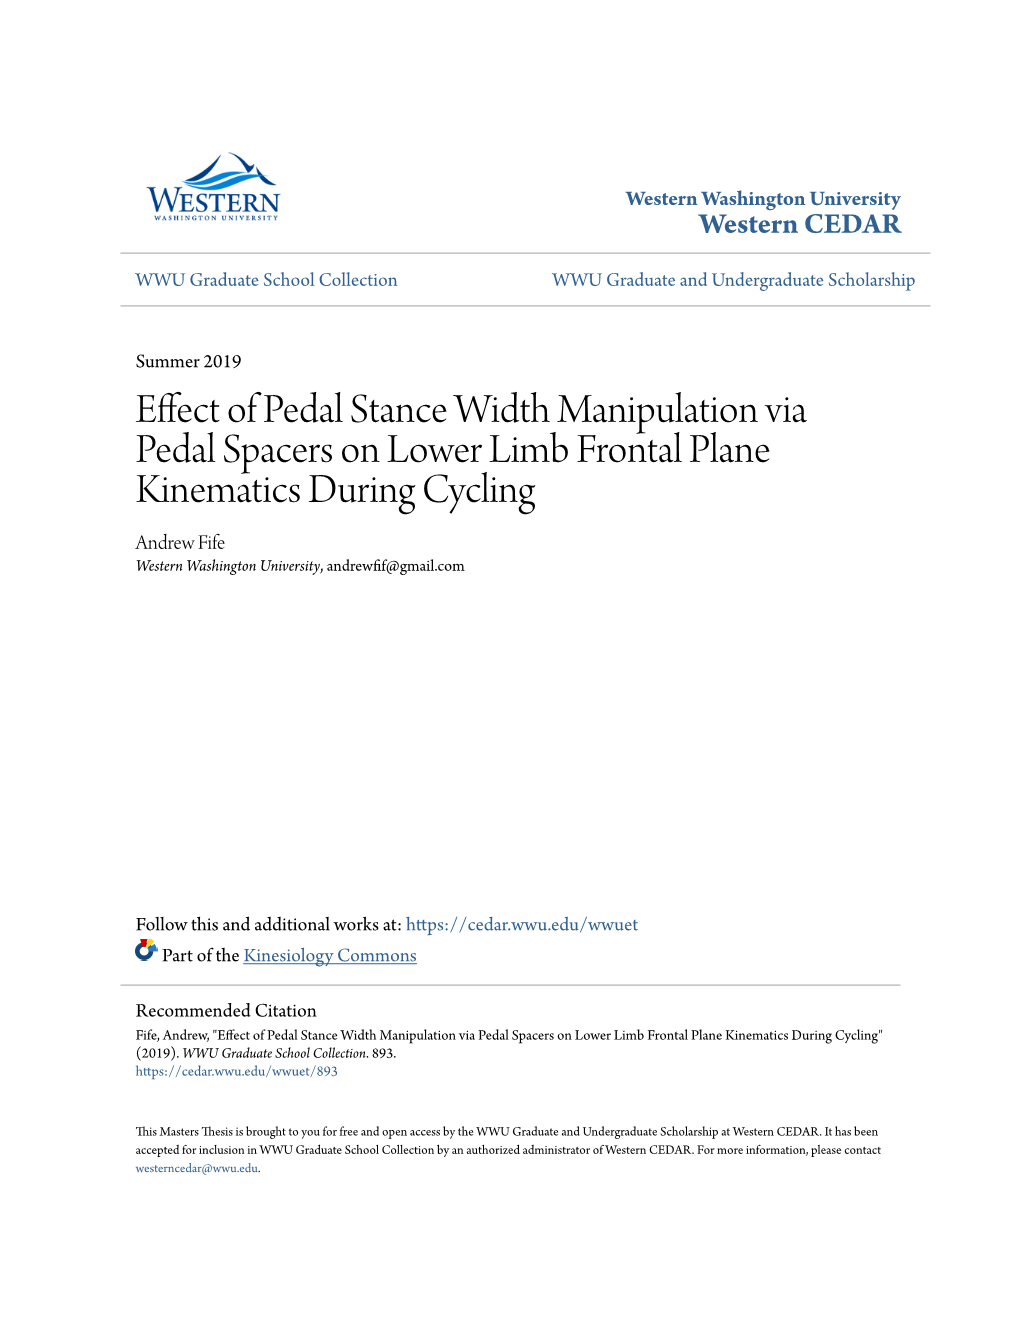 Effect of Pedal Stance Width Manipulation Via Pedal Spacers On